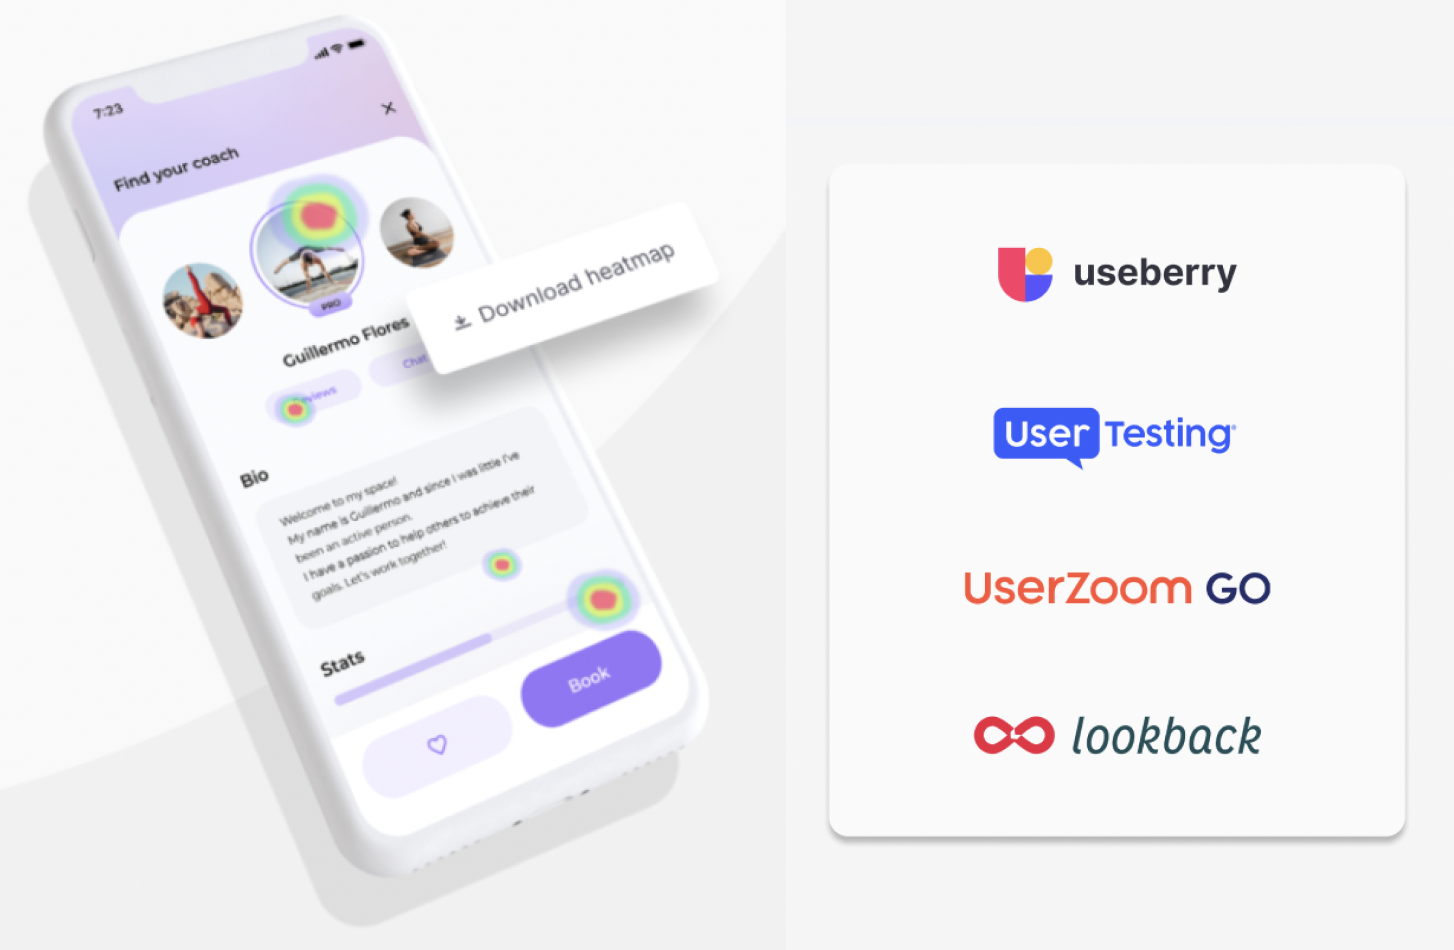 user testing tools that work with ProtoPie